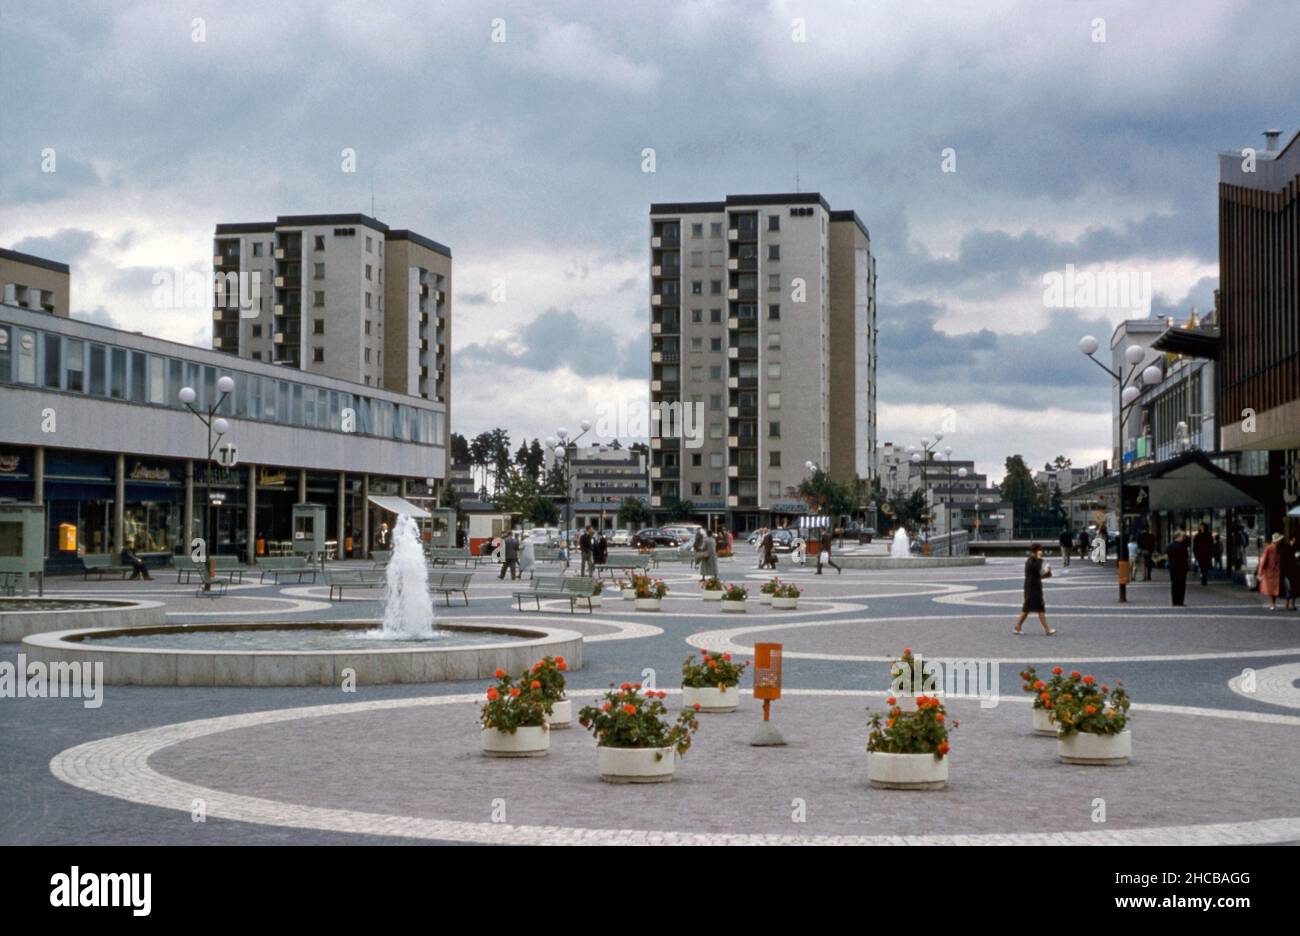 A 1961 view of Vällingby Centrum, the shopping centre of the modern, post-war suburb of Vällingby in the north west of Stockholm, Sweden. The central square often hosts a market. The Stockholm metro runs through the centre. The ‘T’ sign (left) indicates an entrance to the station below the square. This image is from an amateur 35mm Agfacolor colour transparency – a vintage 1960s photograph. Stock Photo